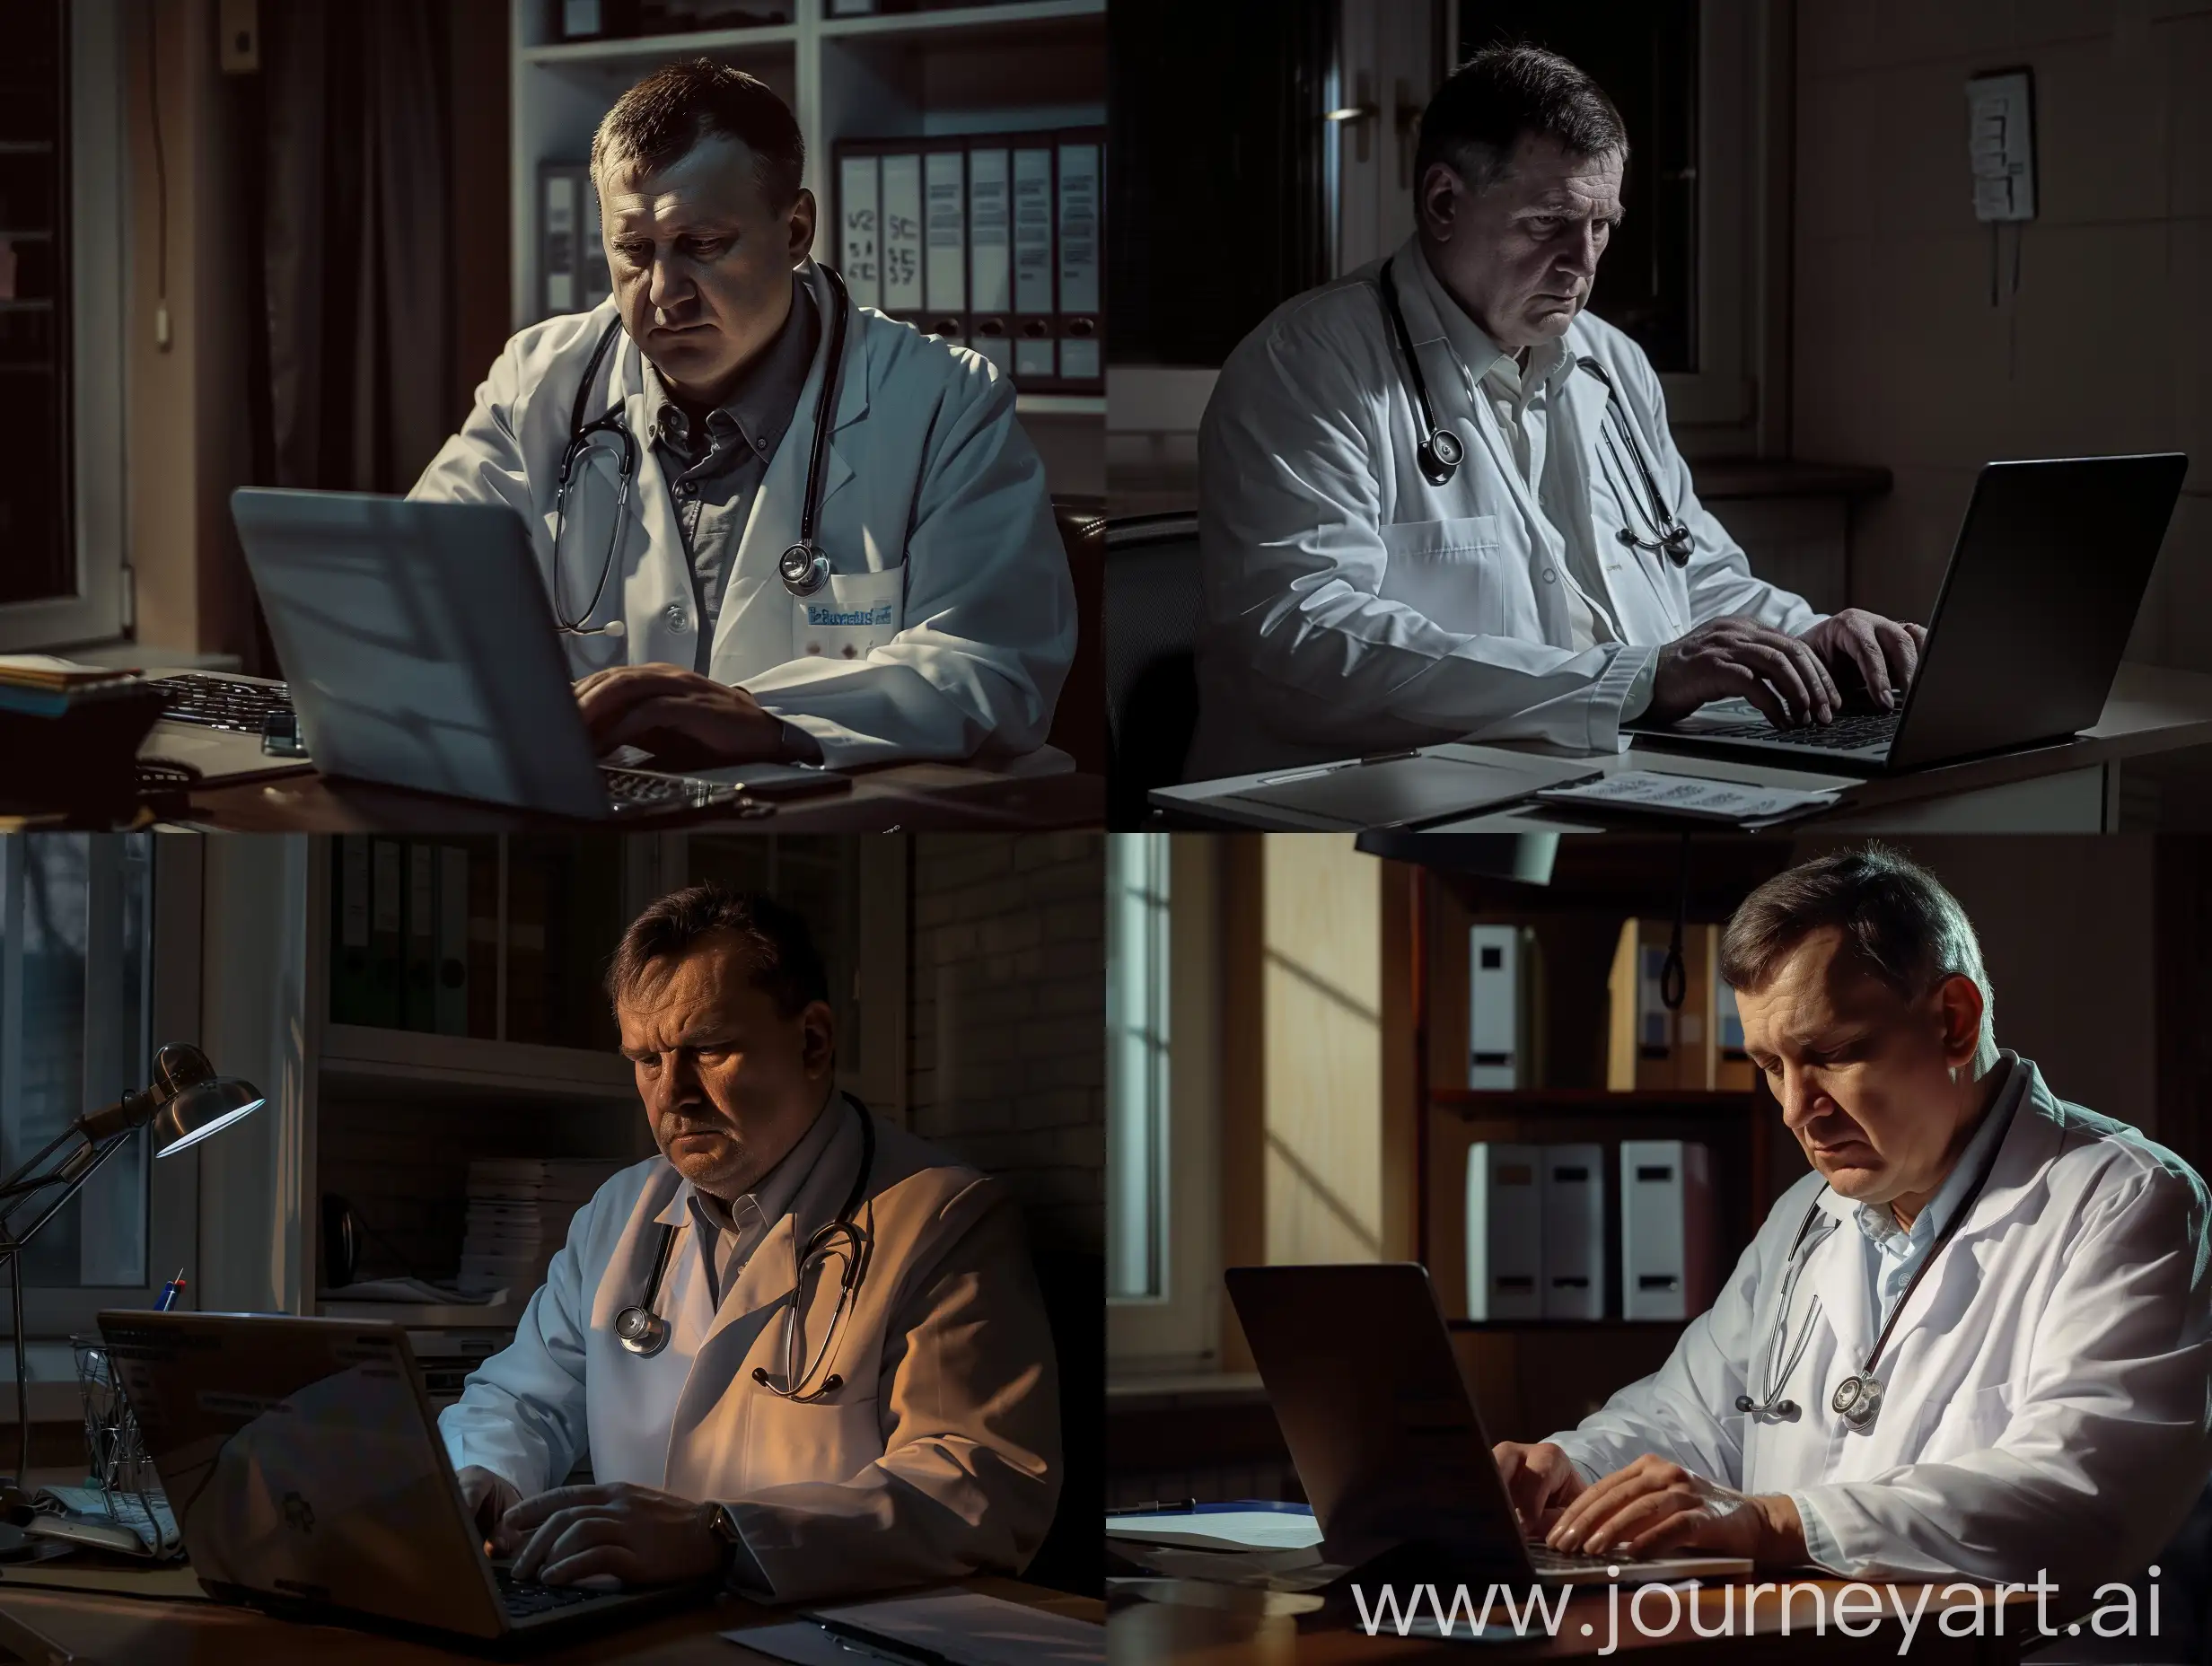 Russian-Doctor-Reviewing-Work-Online-in-Dimly-Lit-Office